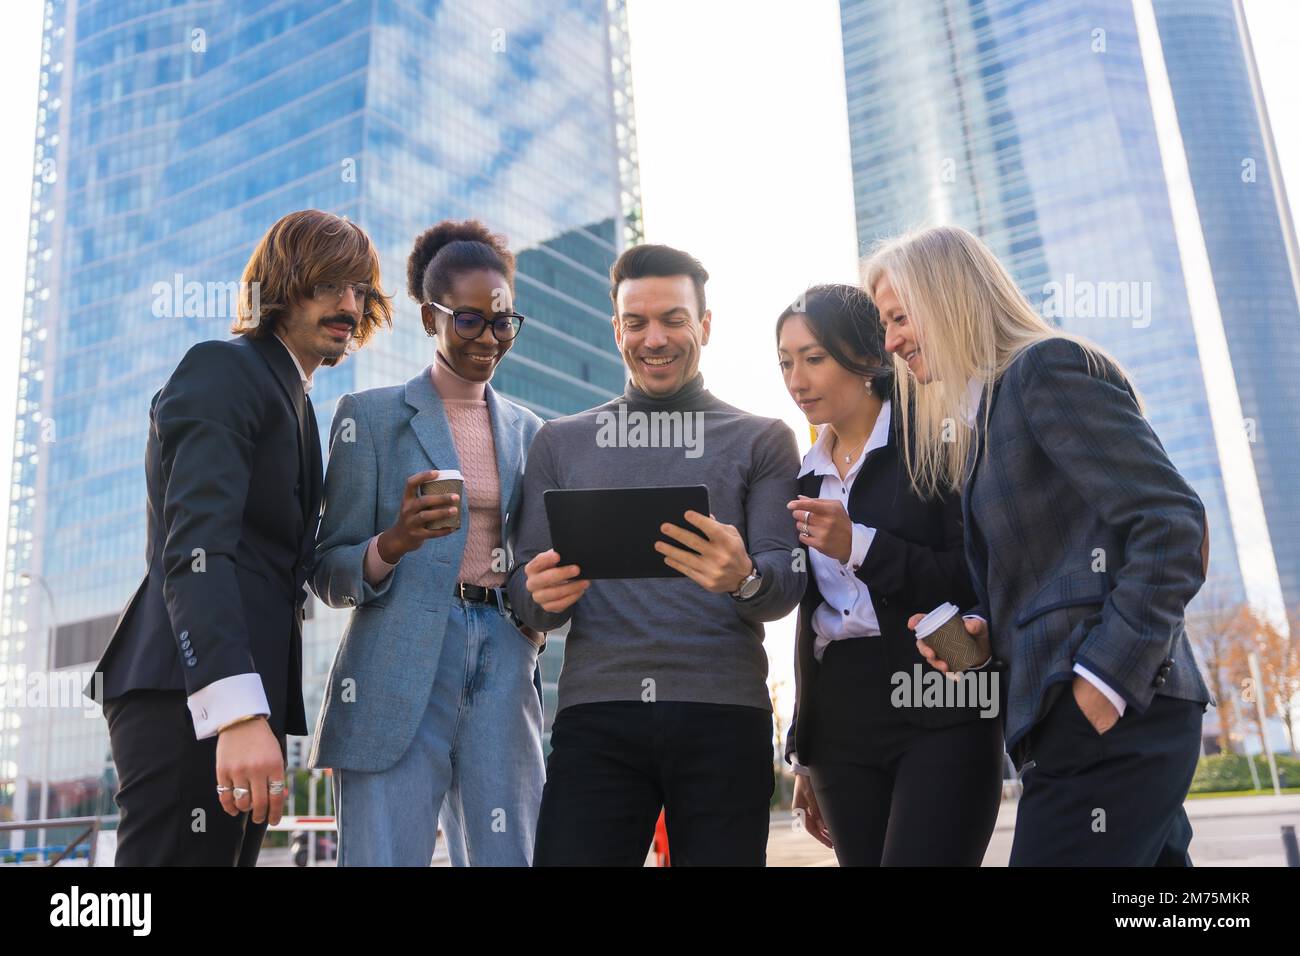 A group of multi-ethnic business people in a business park looking at a tablet Stock Photo